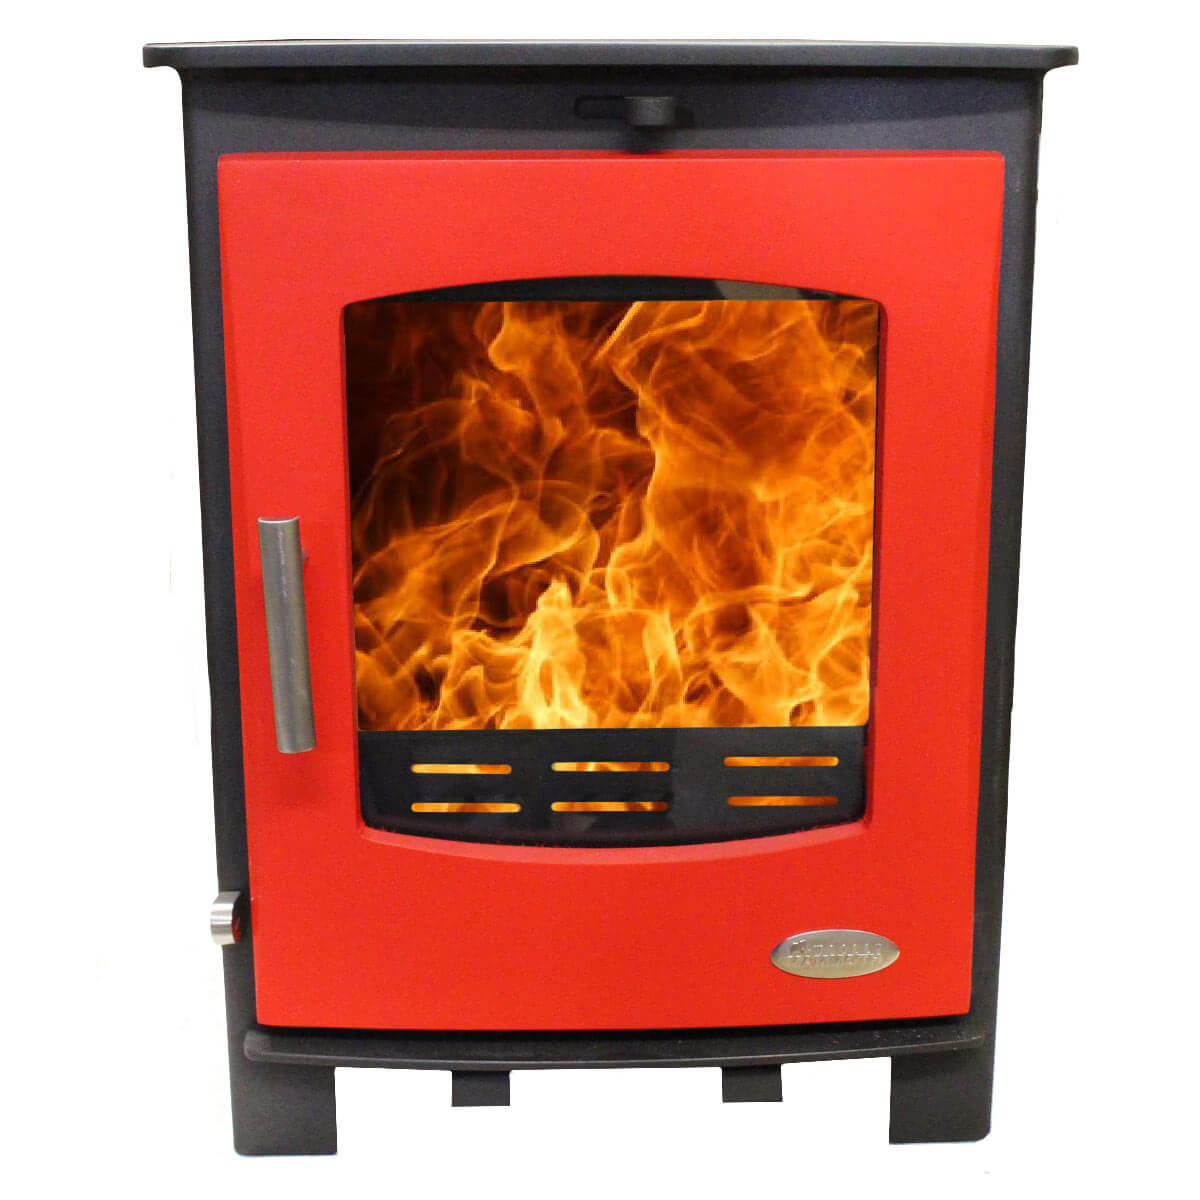 Woolly Mammoth 5 Mk2 Multifuel Stove - Red